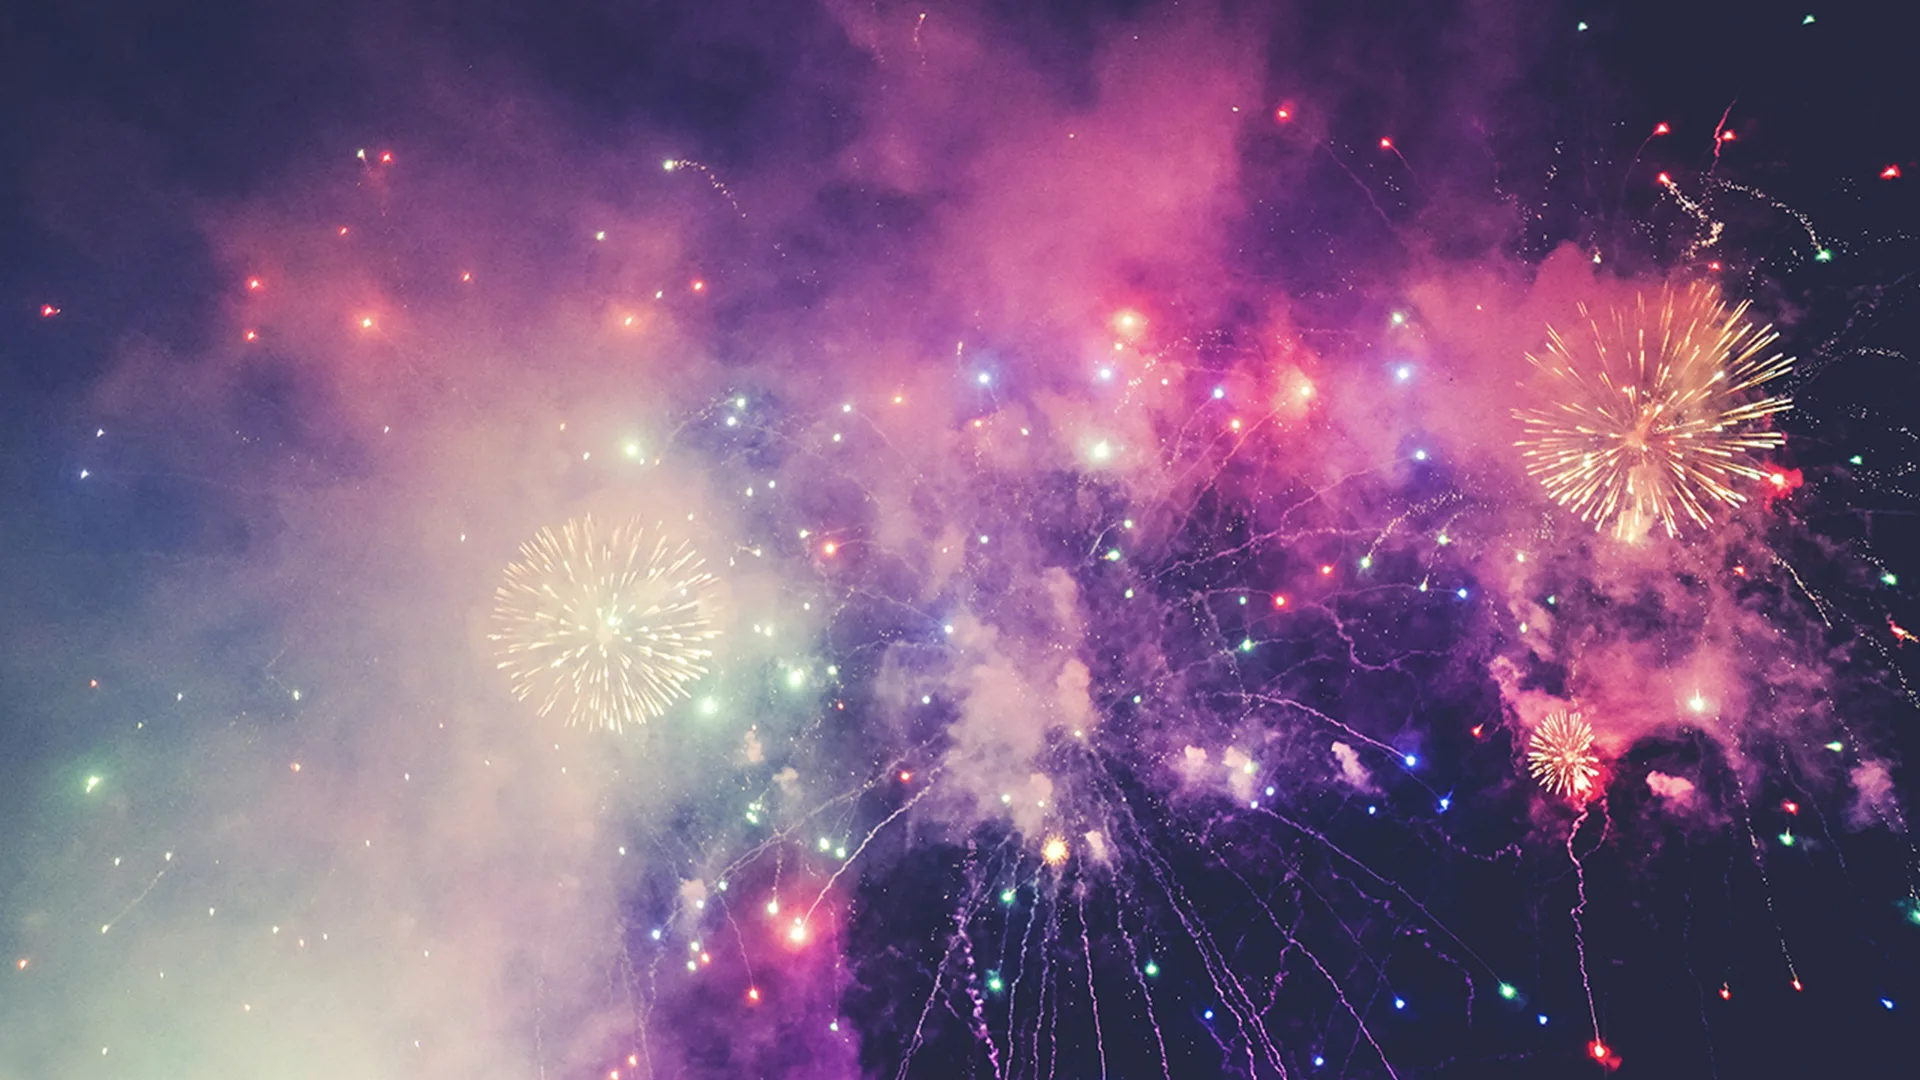 Purple and pink fireworks in the sky